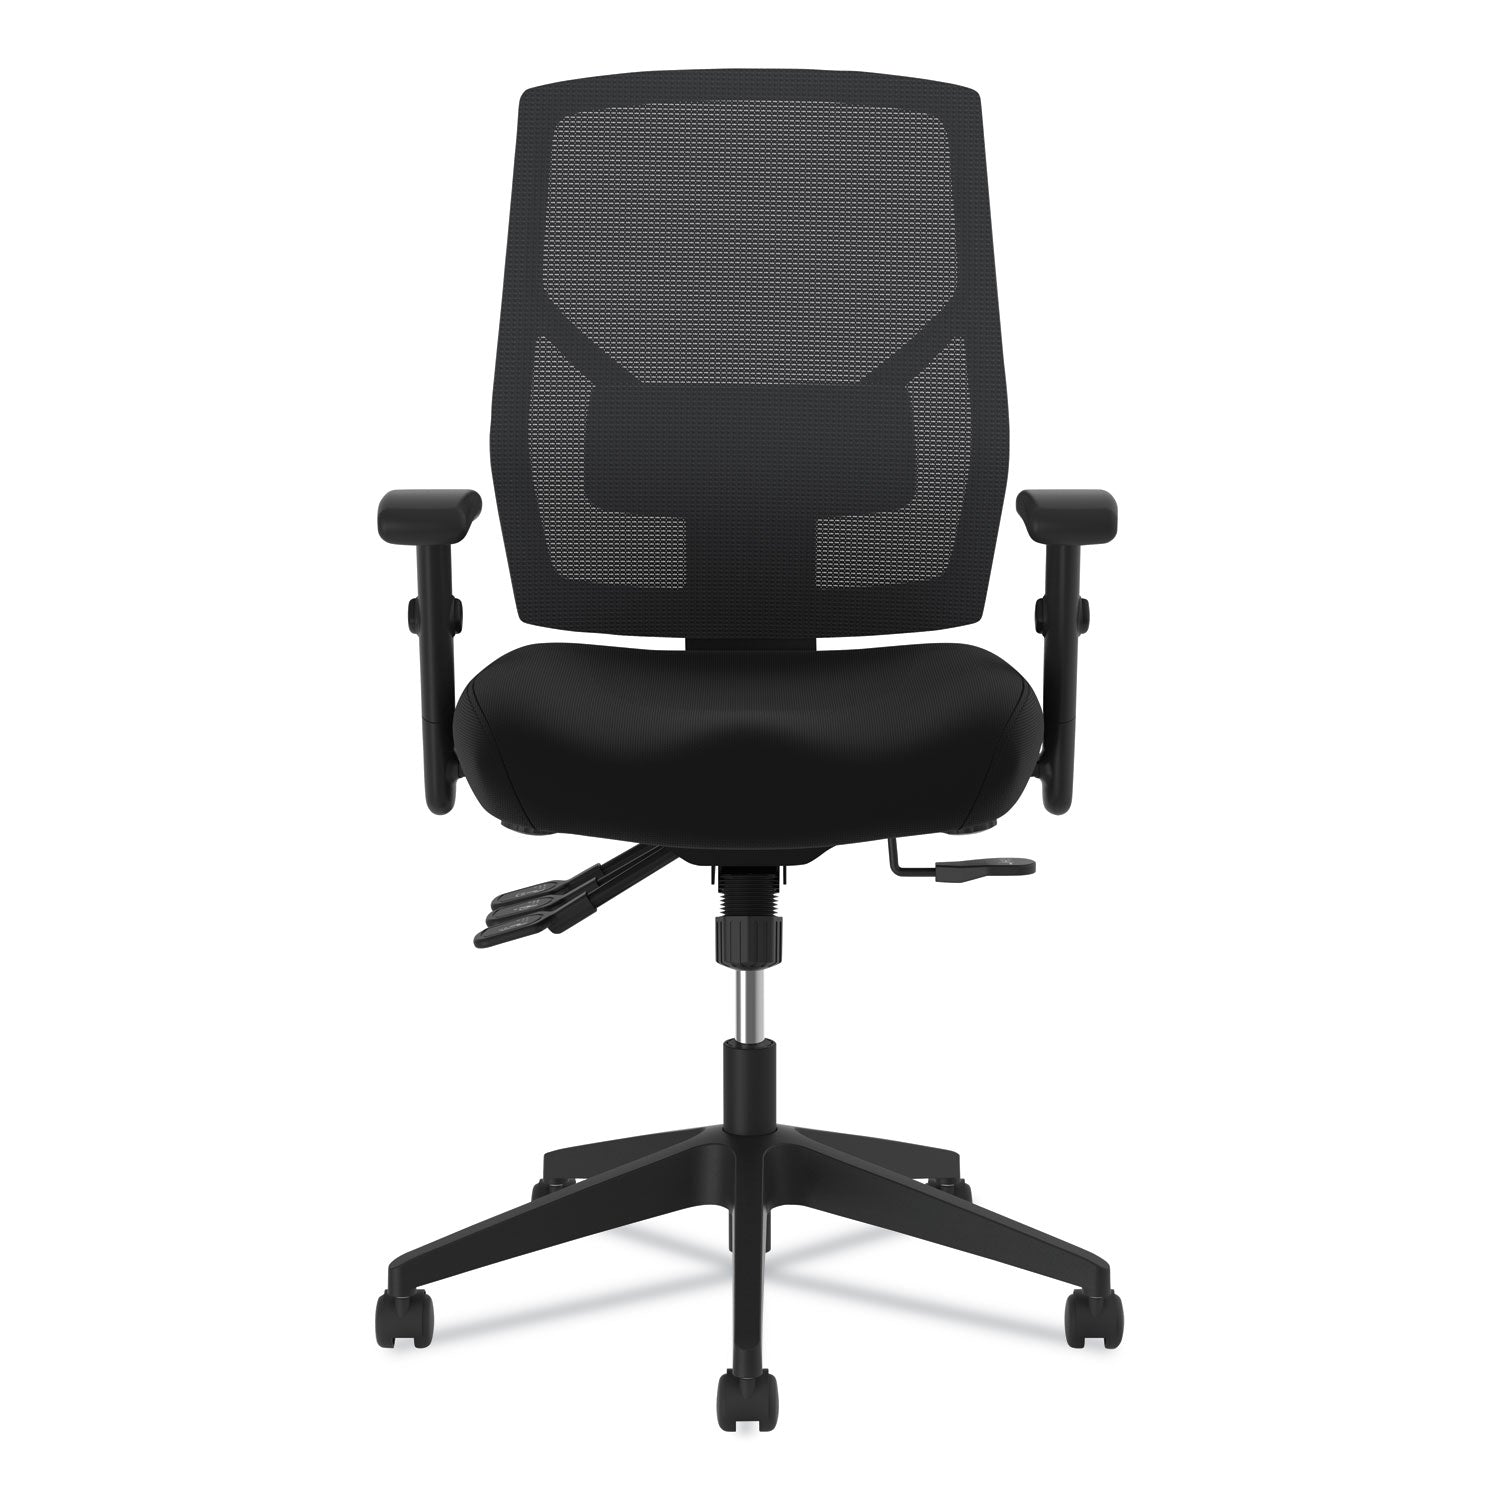 vl582-high-back-task-chair-supports-up-to-250-lb-19-to-22-seat-height-black_bsxvl582es10t - 2